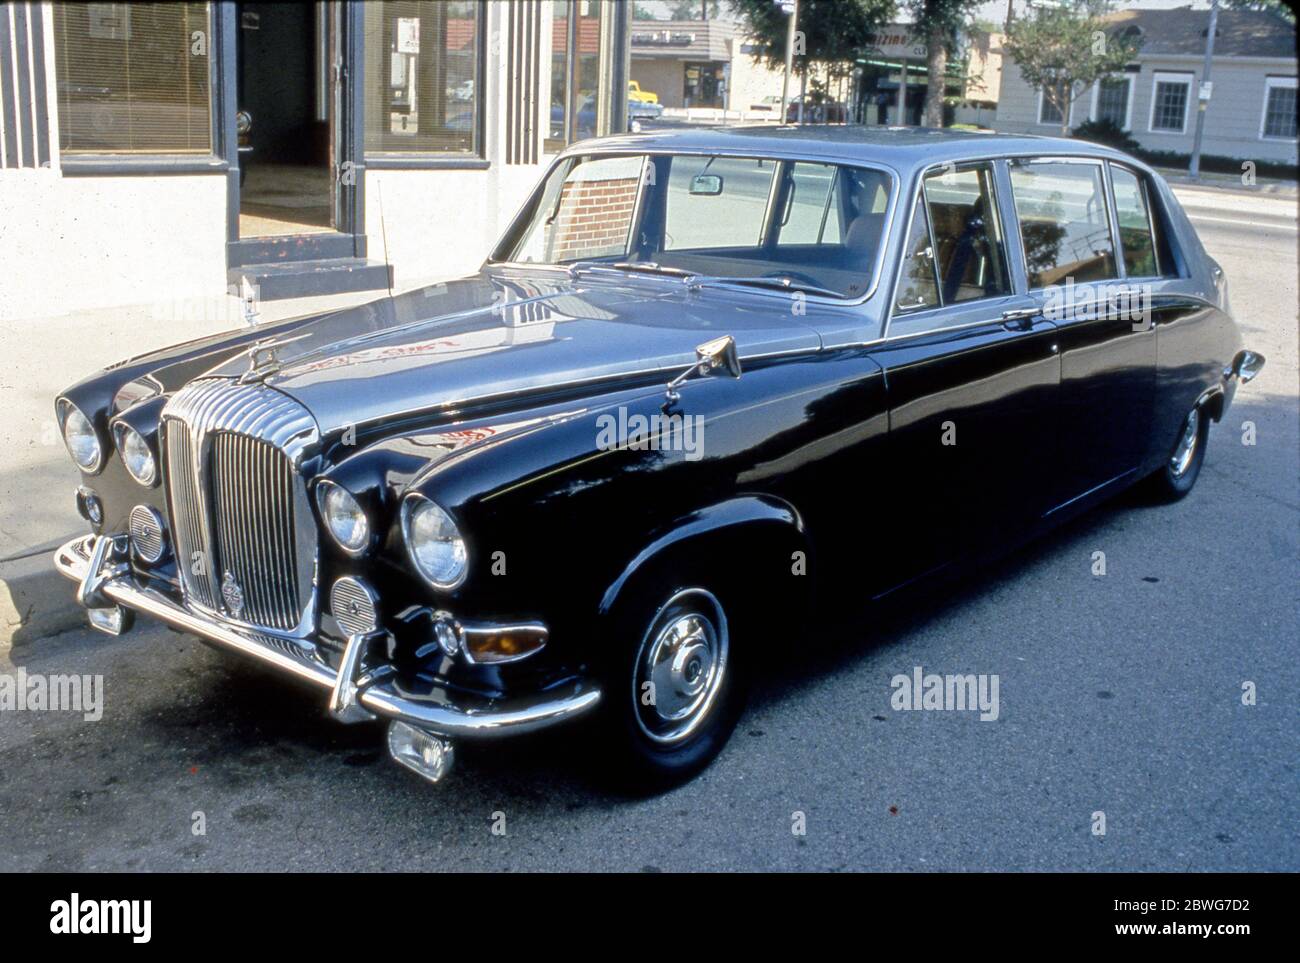 Classic Car: 1970 Royal Daimler Limousine owned by Howard Hughes. Stock Photo